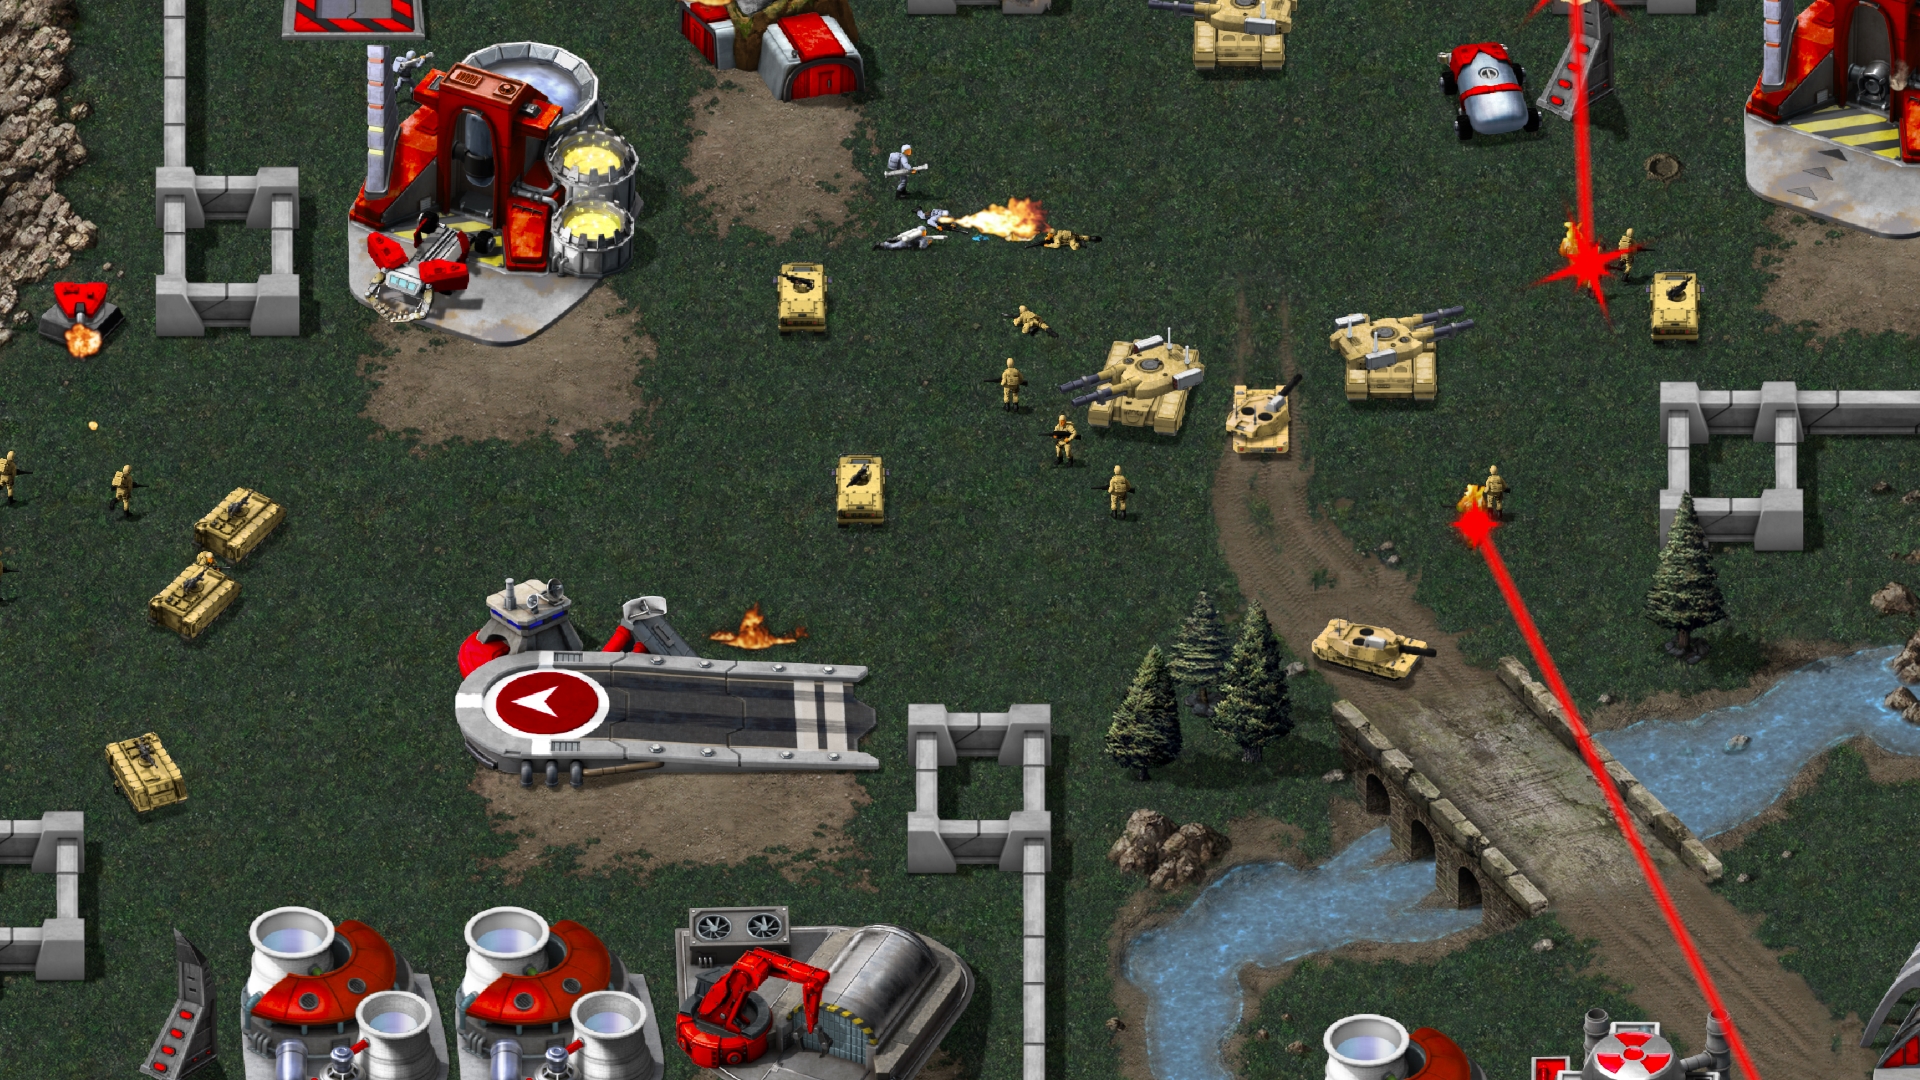 download command & conquer remastered collection